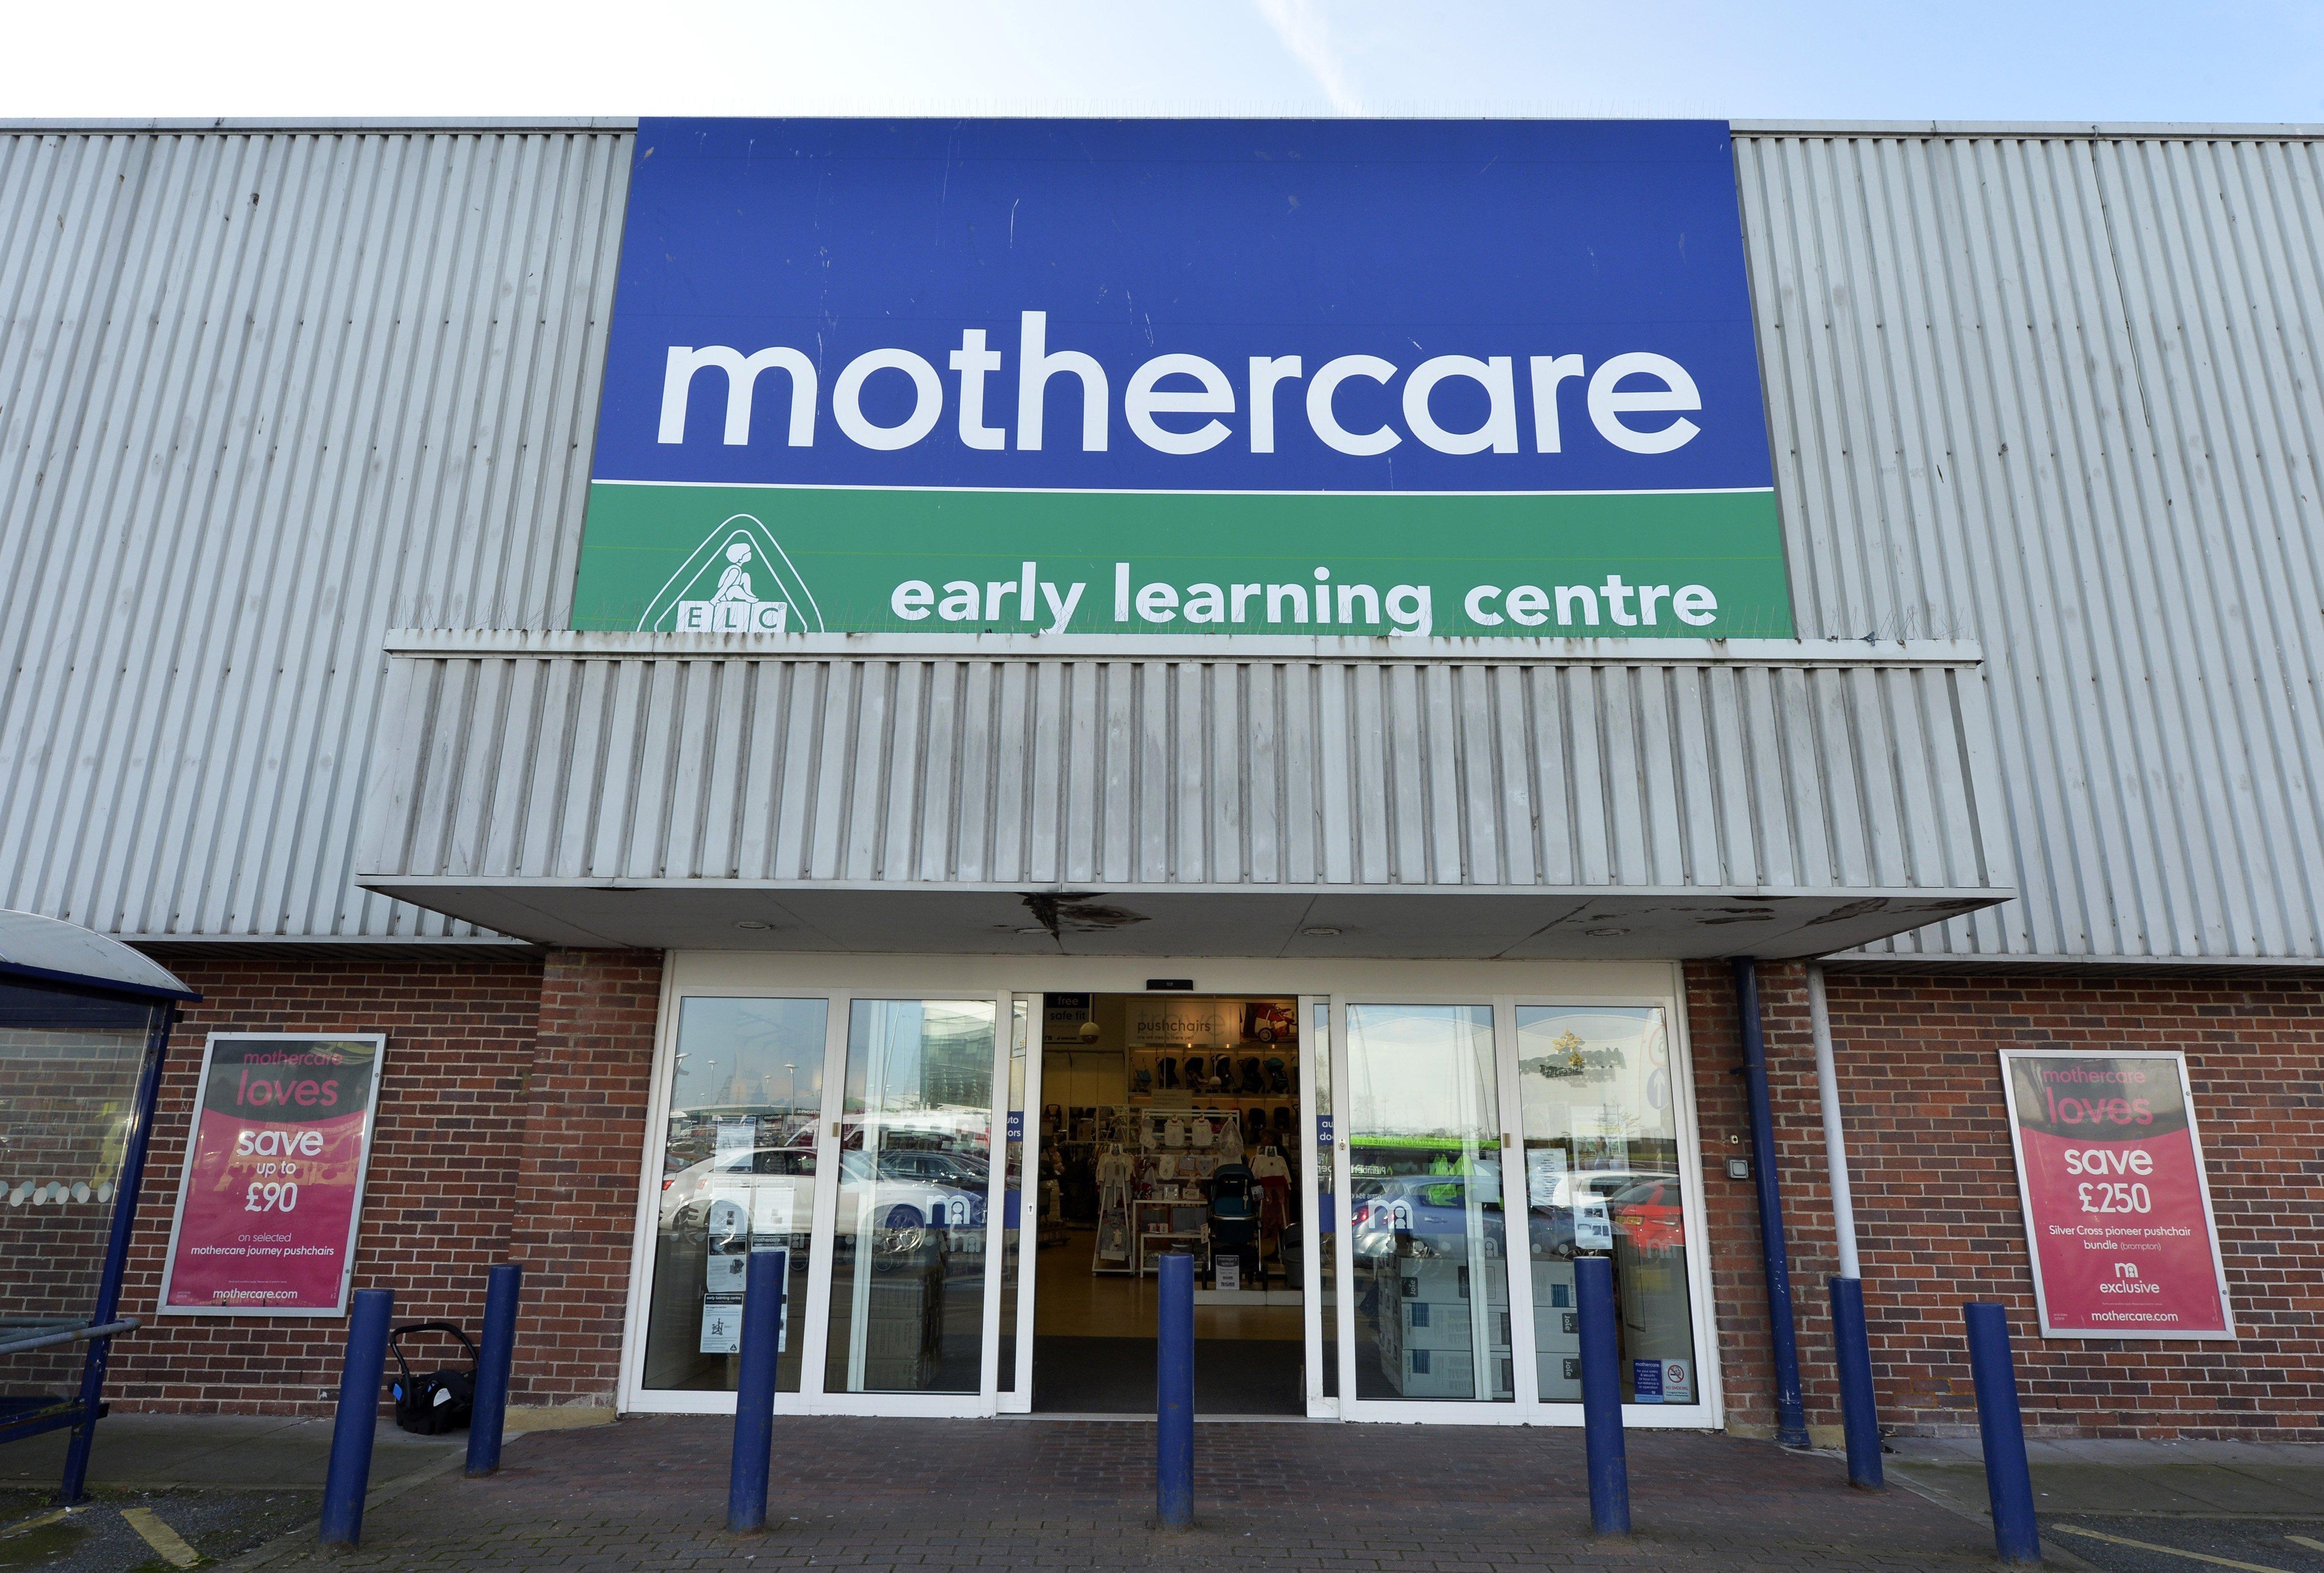 Mothercare in Hampden Park has announced a closing down sale (Photo by Jon Rigby)